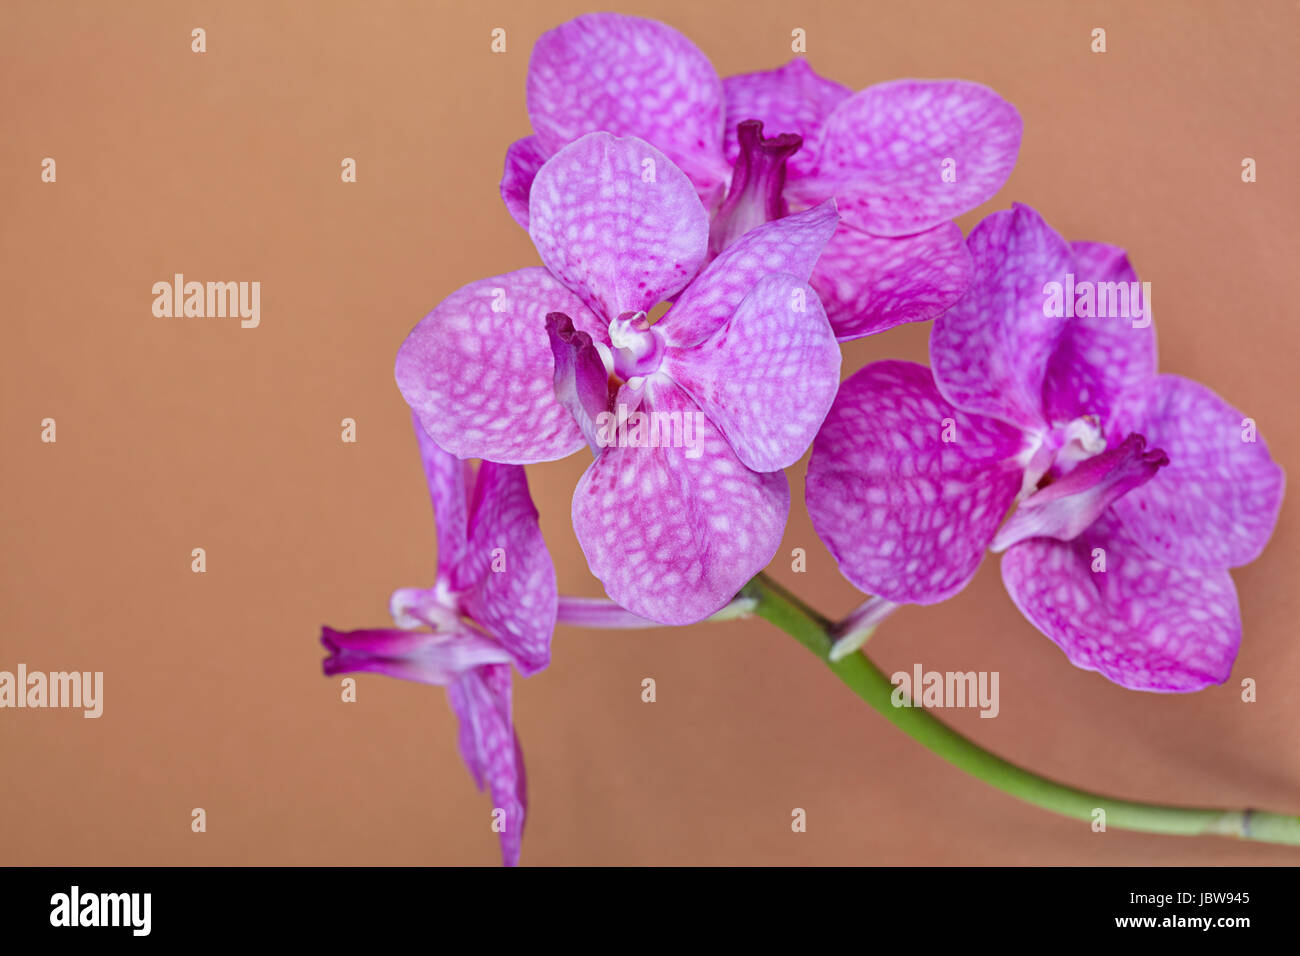 The branch of purple orchid on an orange background Stock Photo